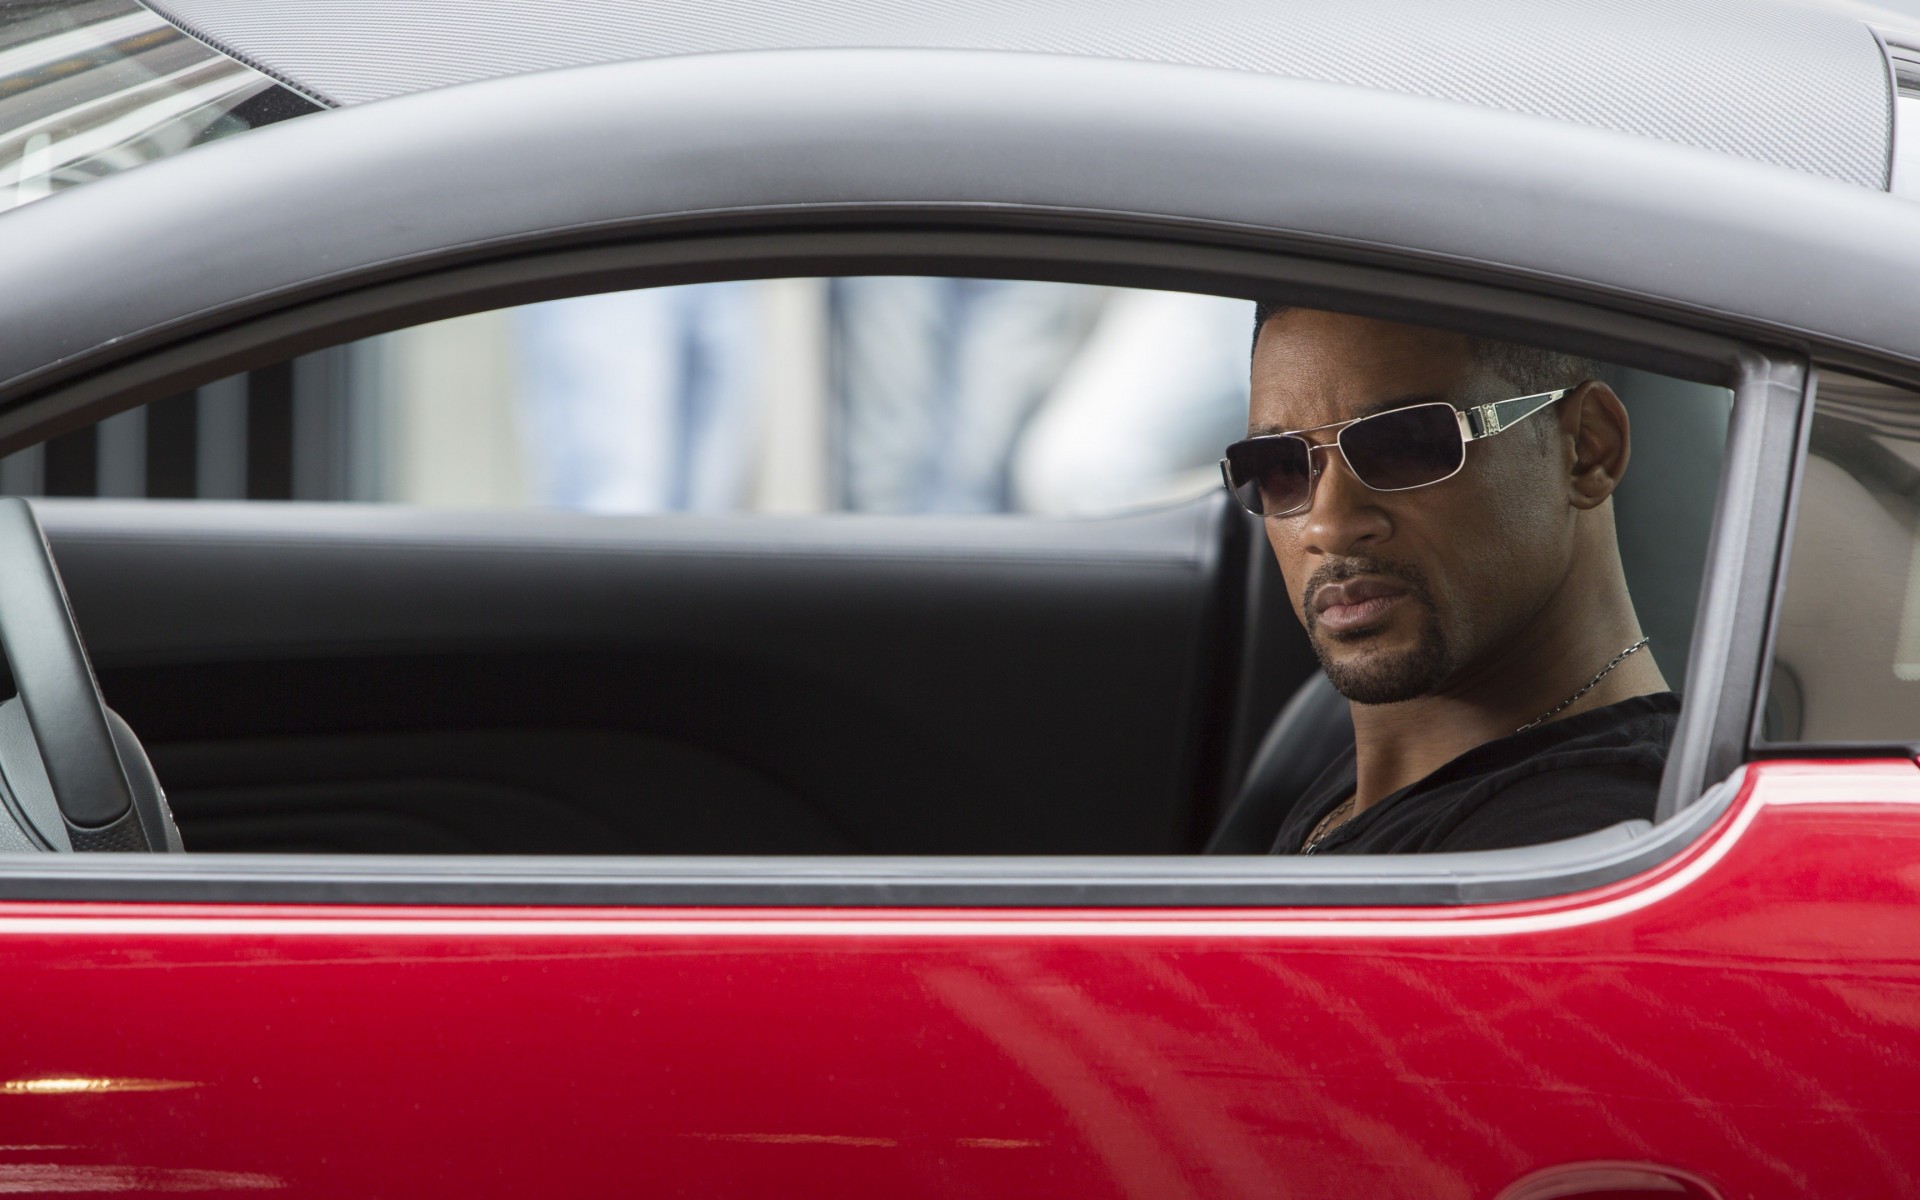 Will Smith at the shooting of "Focus" Wallpaper for Desktop 1920x1200